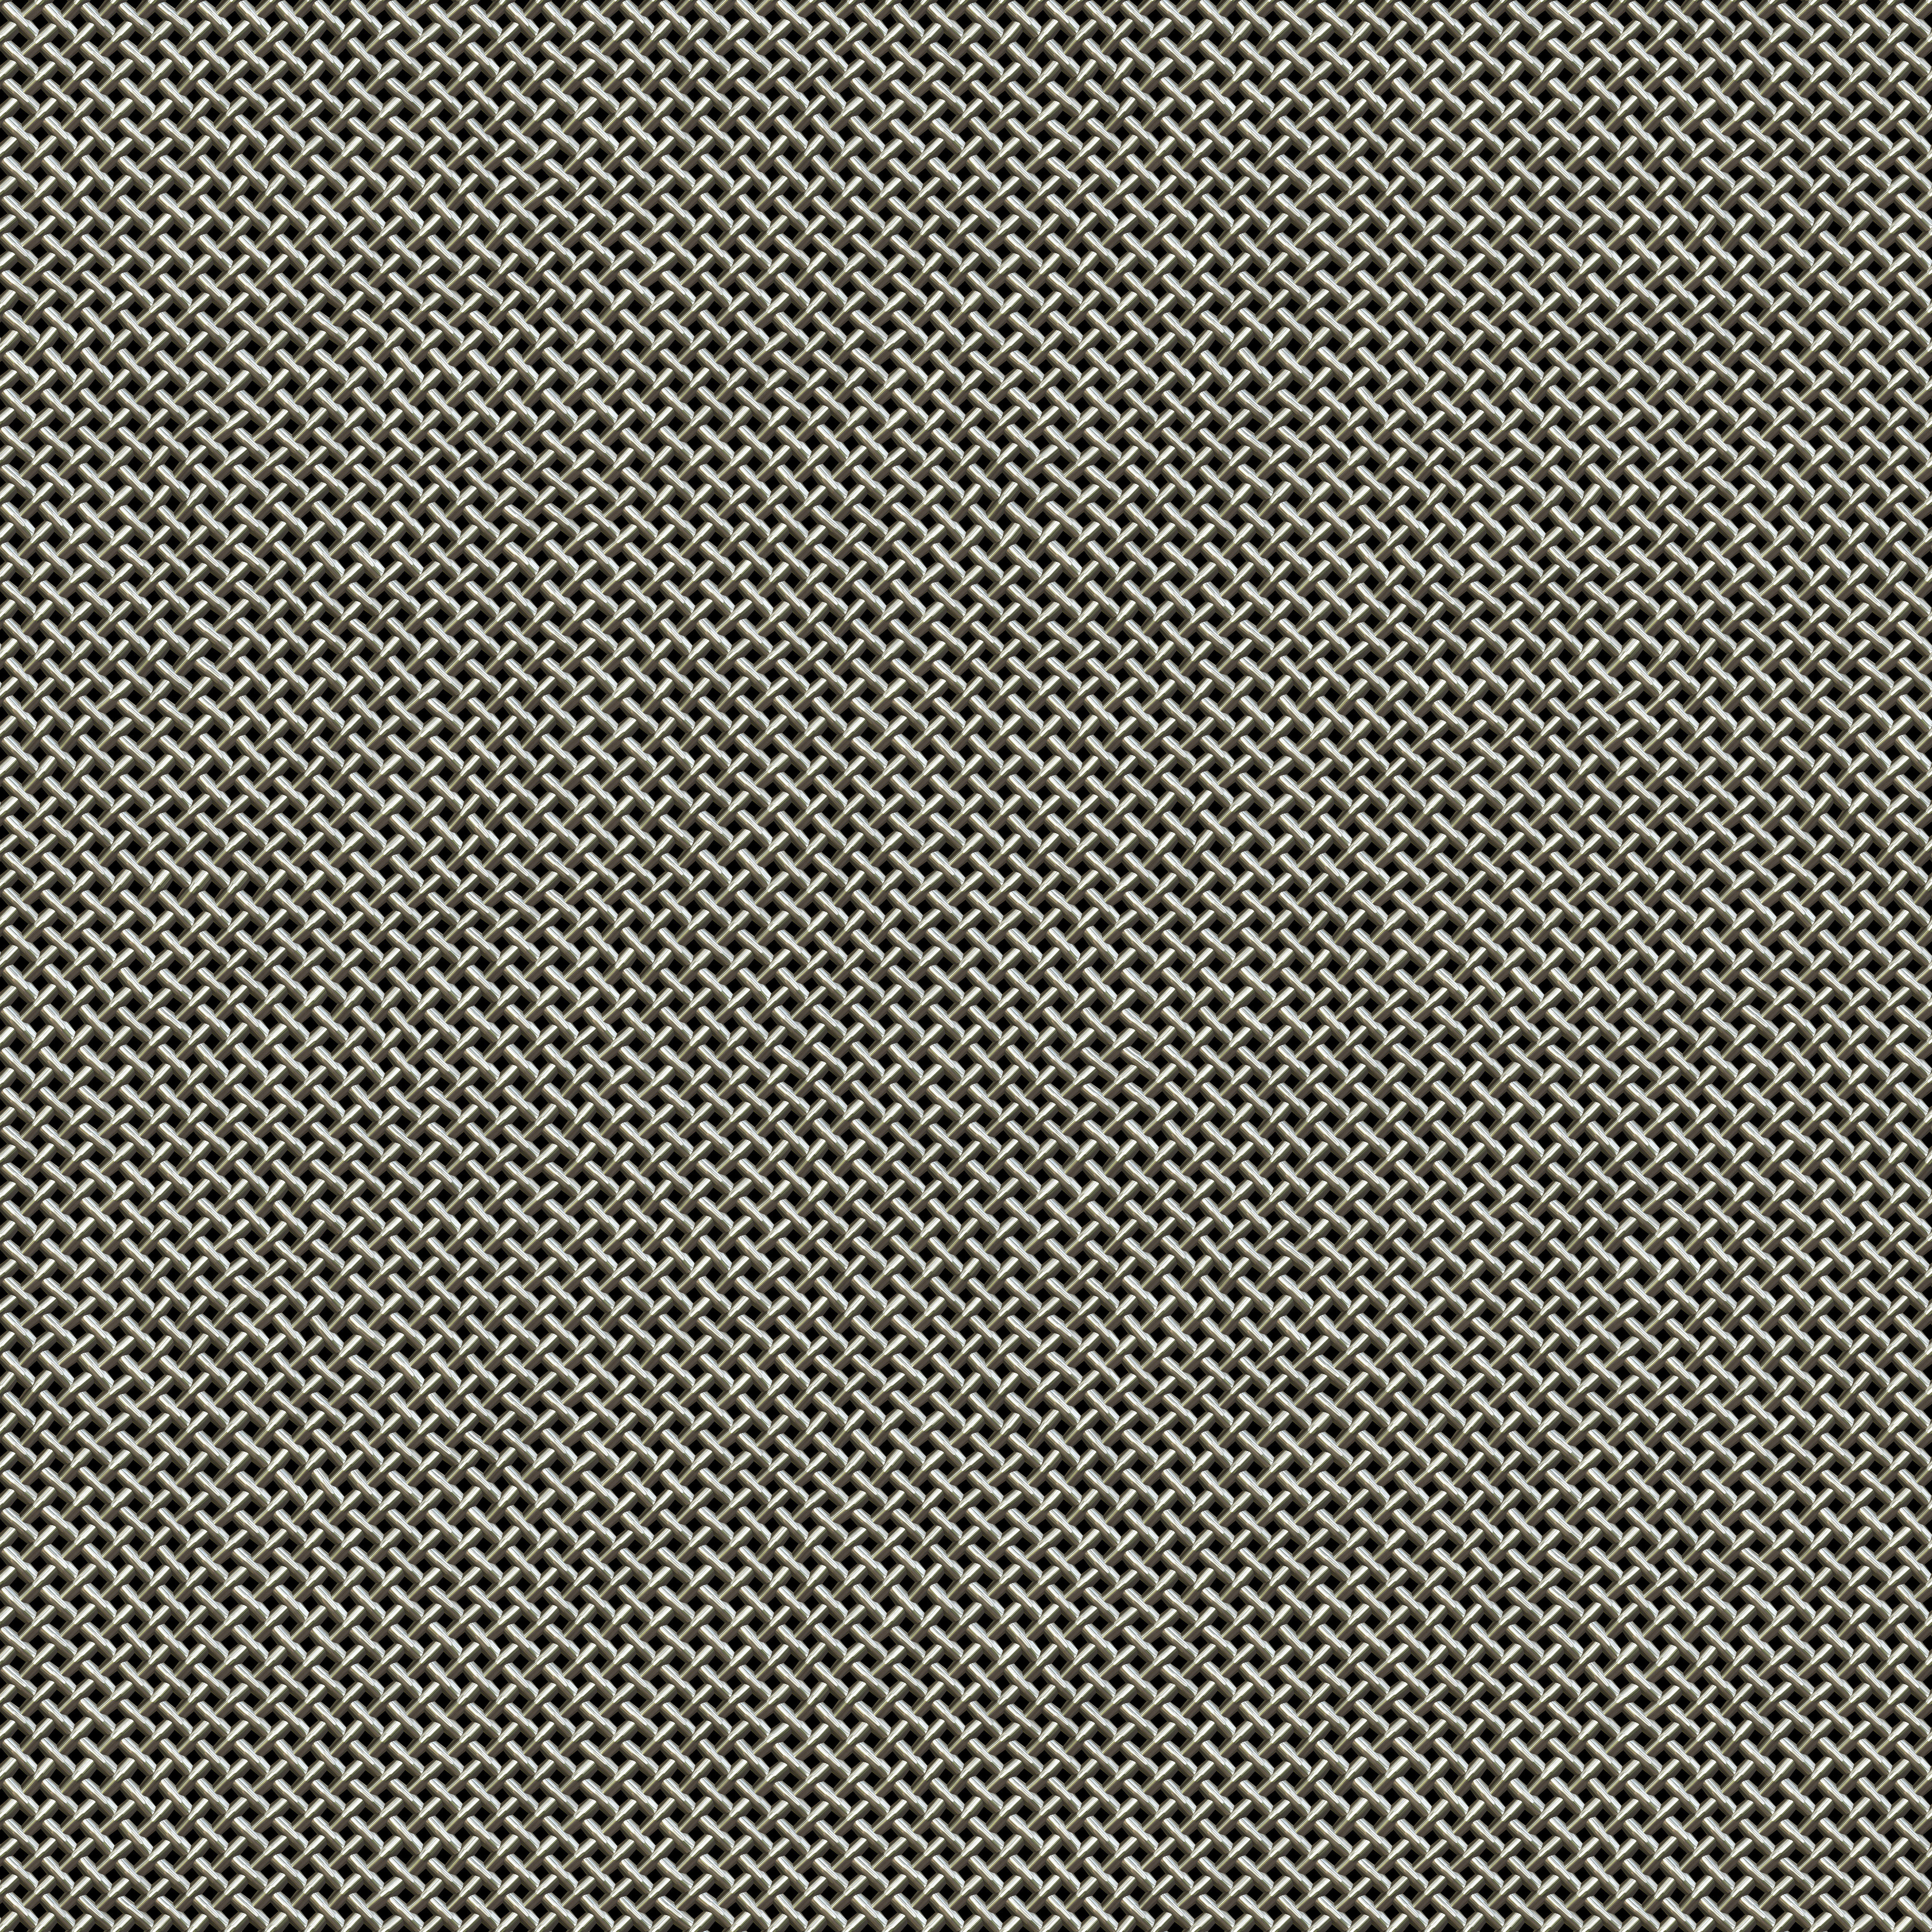 wire mesh metal background texture | www.myfreetextures.com | Free